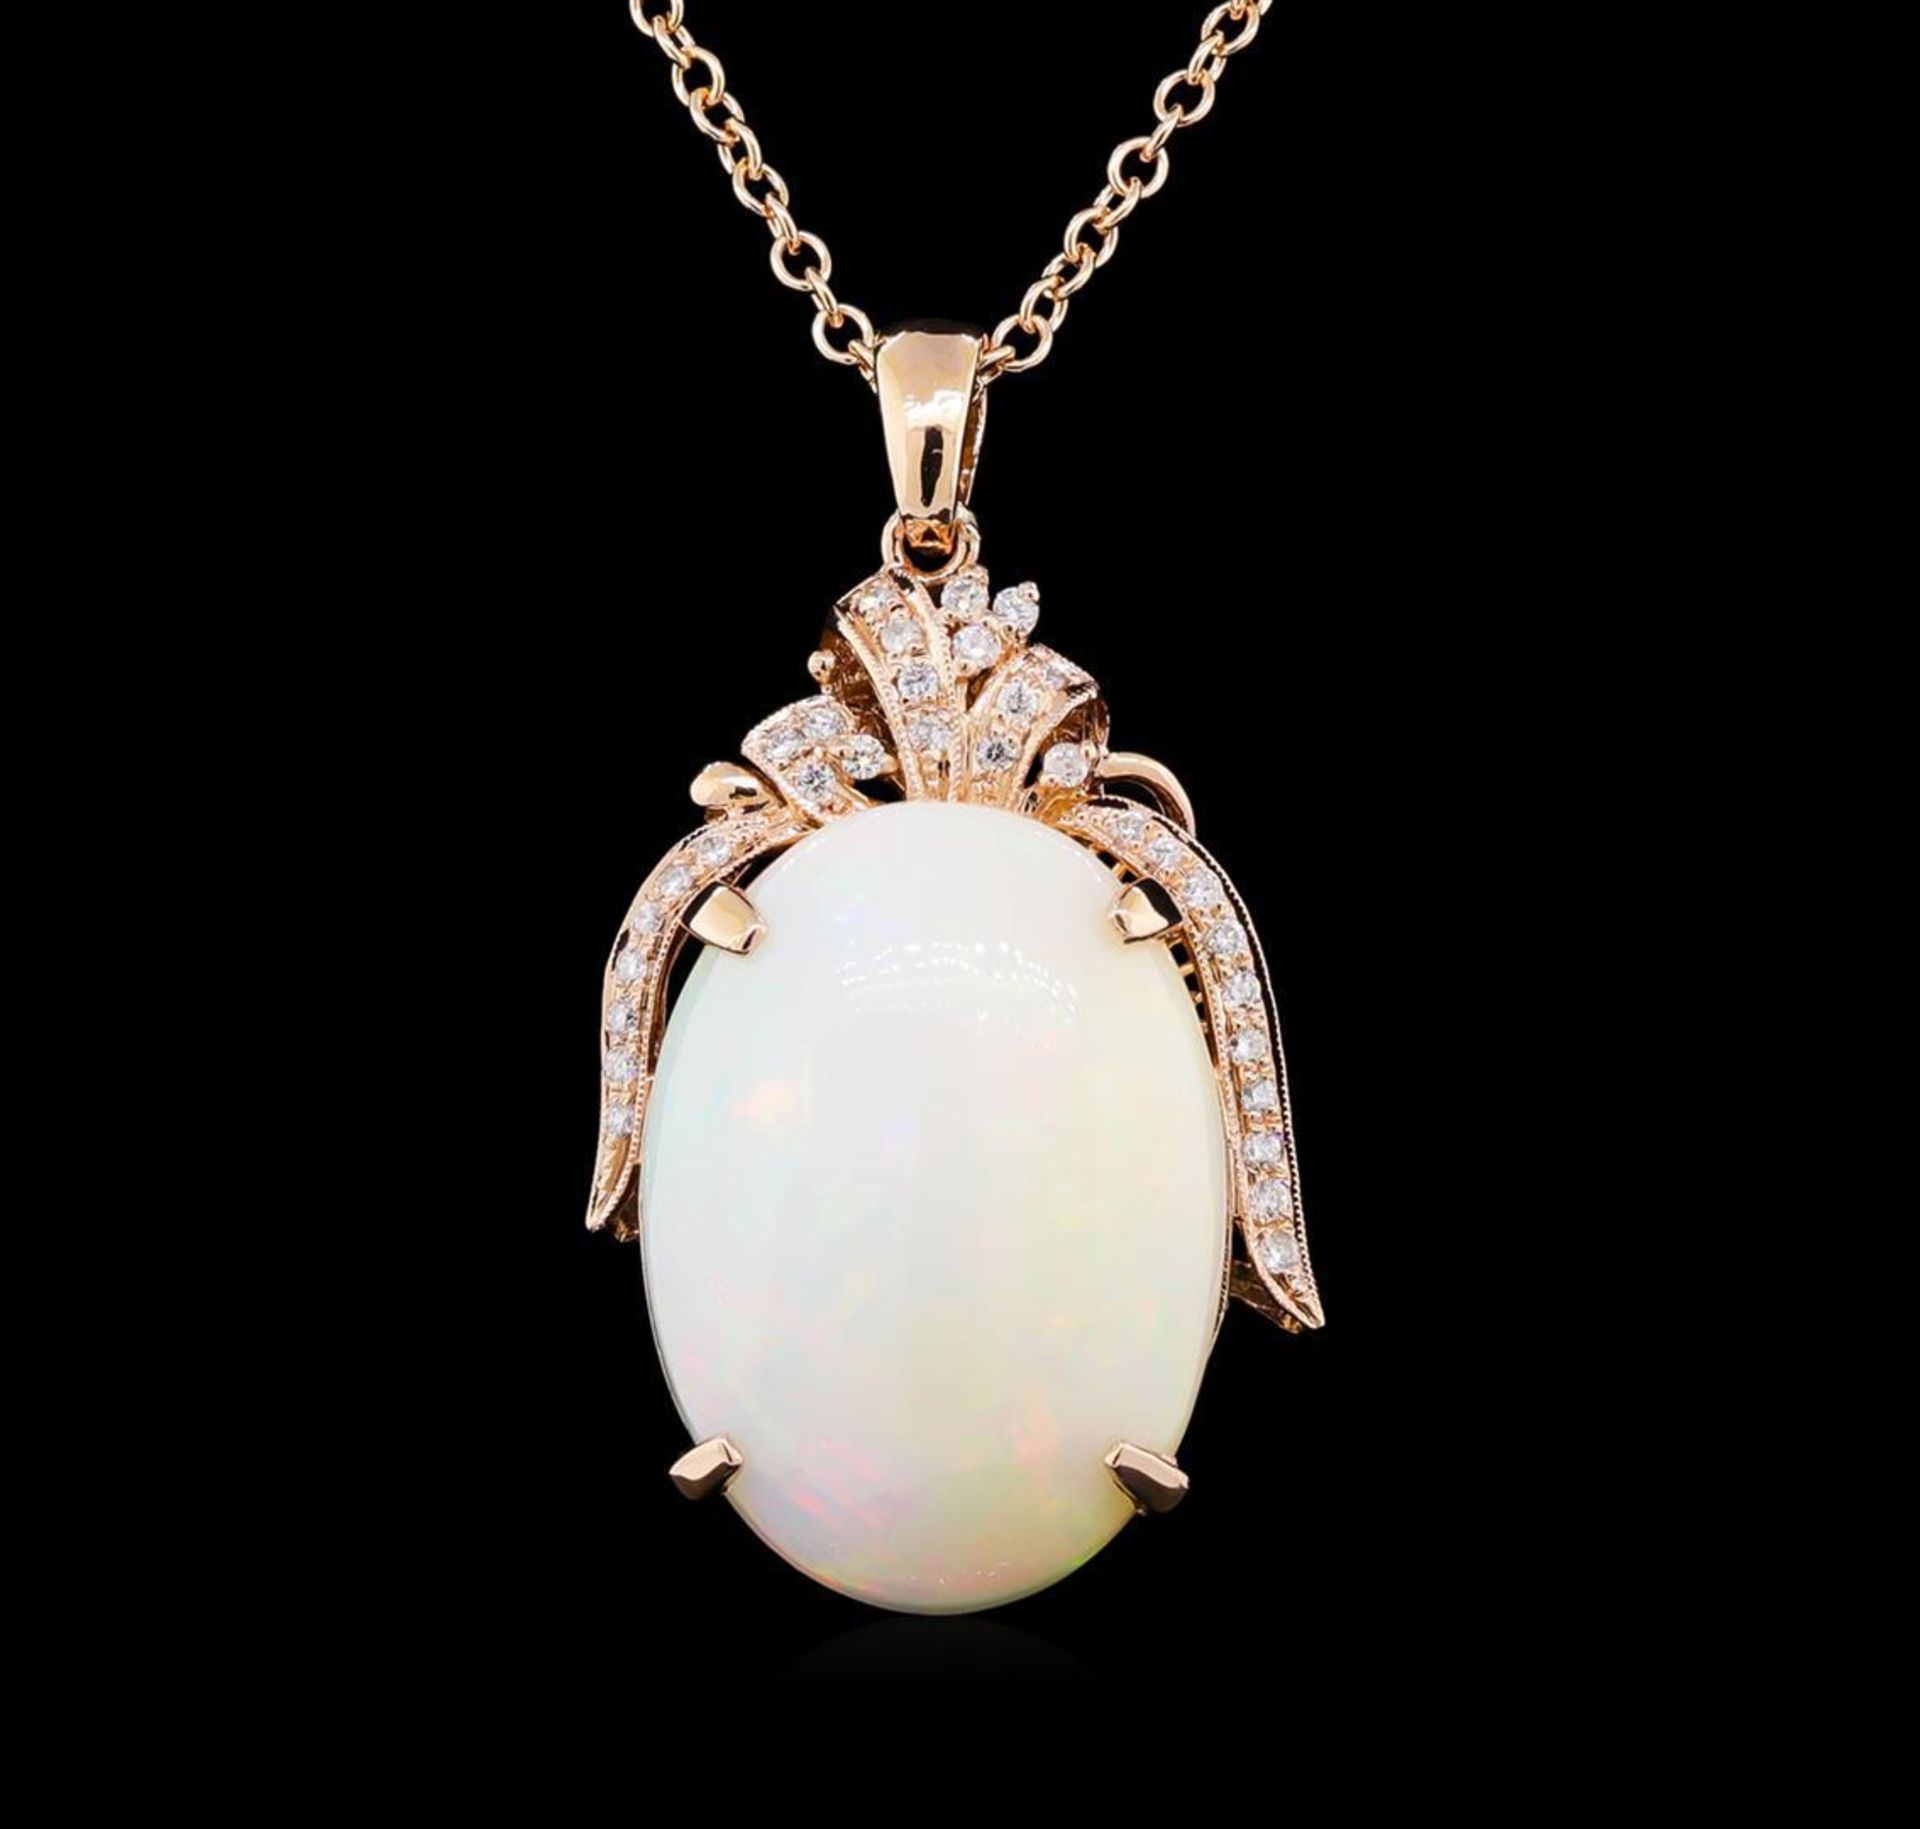 27.11 ctw Opal and Diamond Pendant With Chain - 14KT Rose Gold - Image 2 of 3